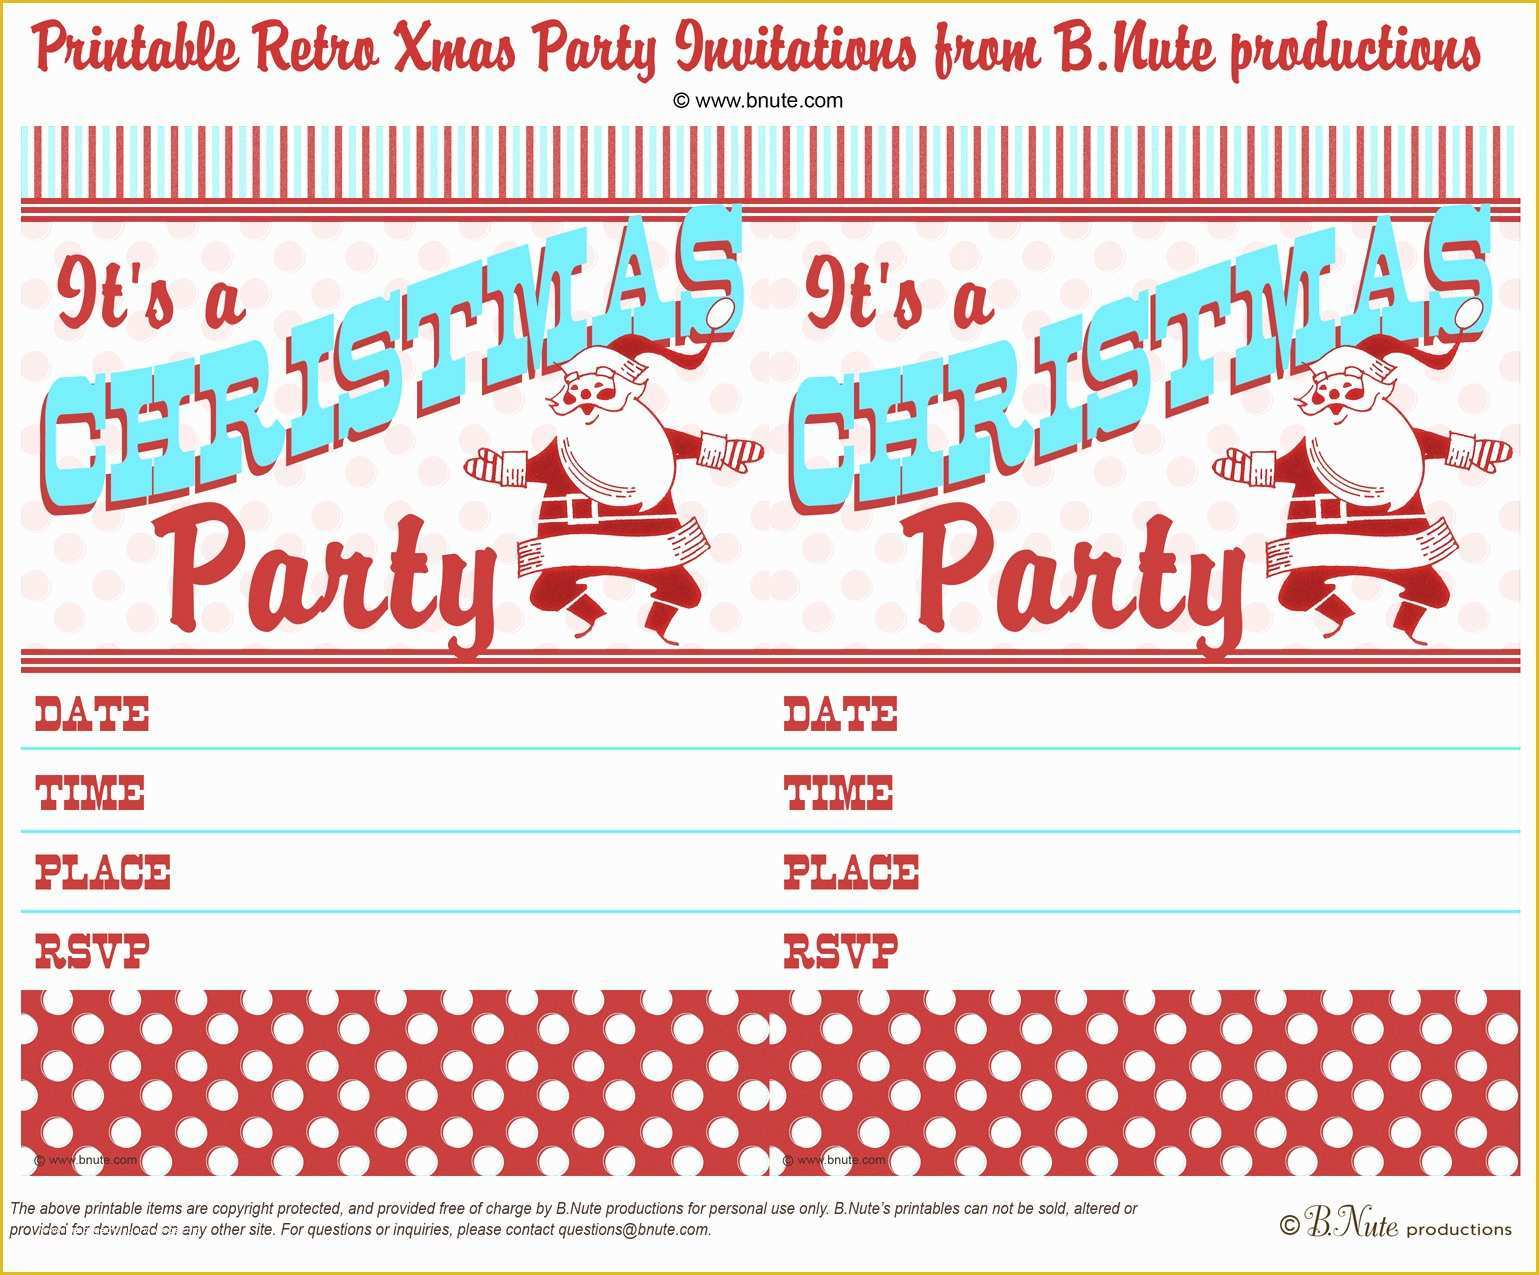 Christmas Party Invitation Templates Free Printable Of Bnute Productions Free Printable Retro Christmas Party